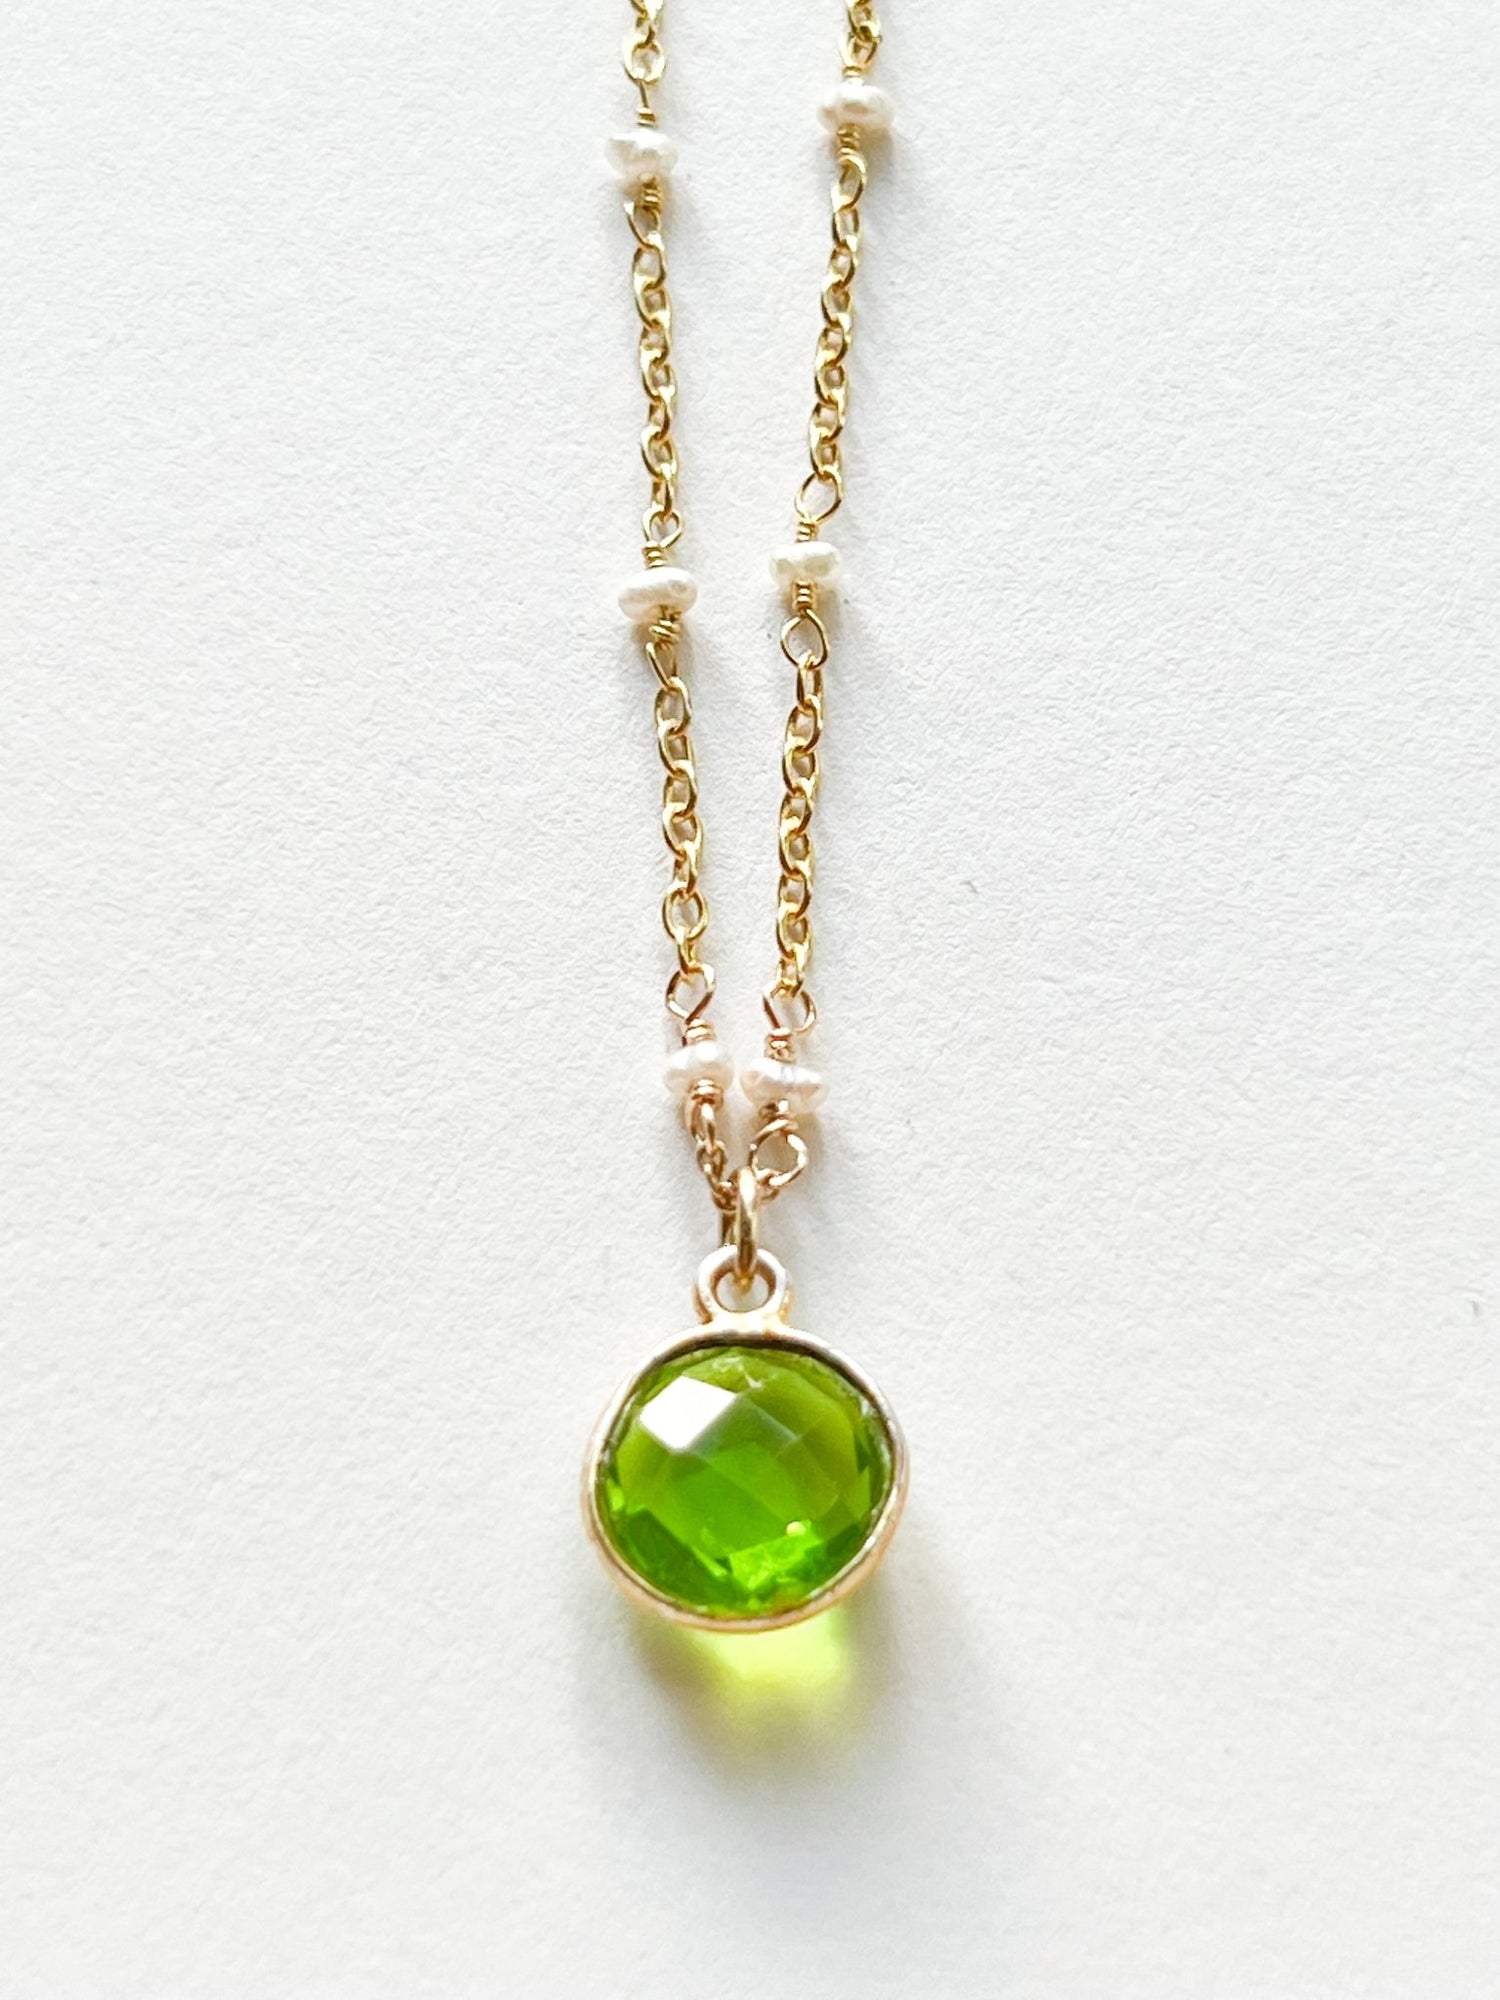 Green Hydro Quartz Round Charm Necklace on Gold Chain with White Freshwater Pearls by Sage Machado - The Sage Lifestyle